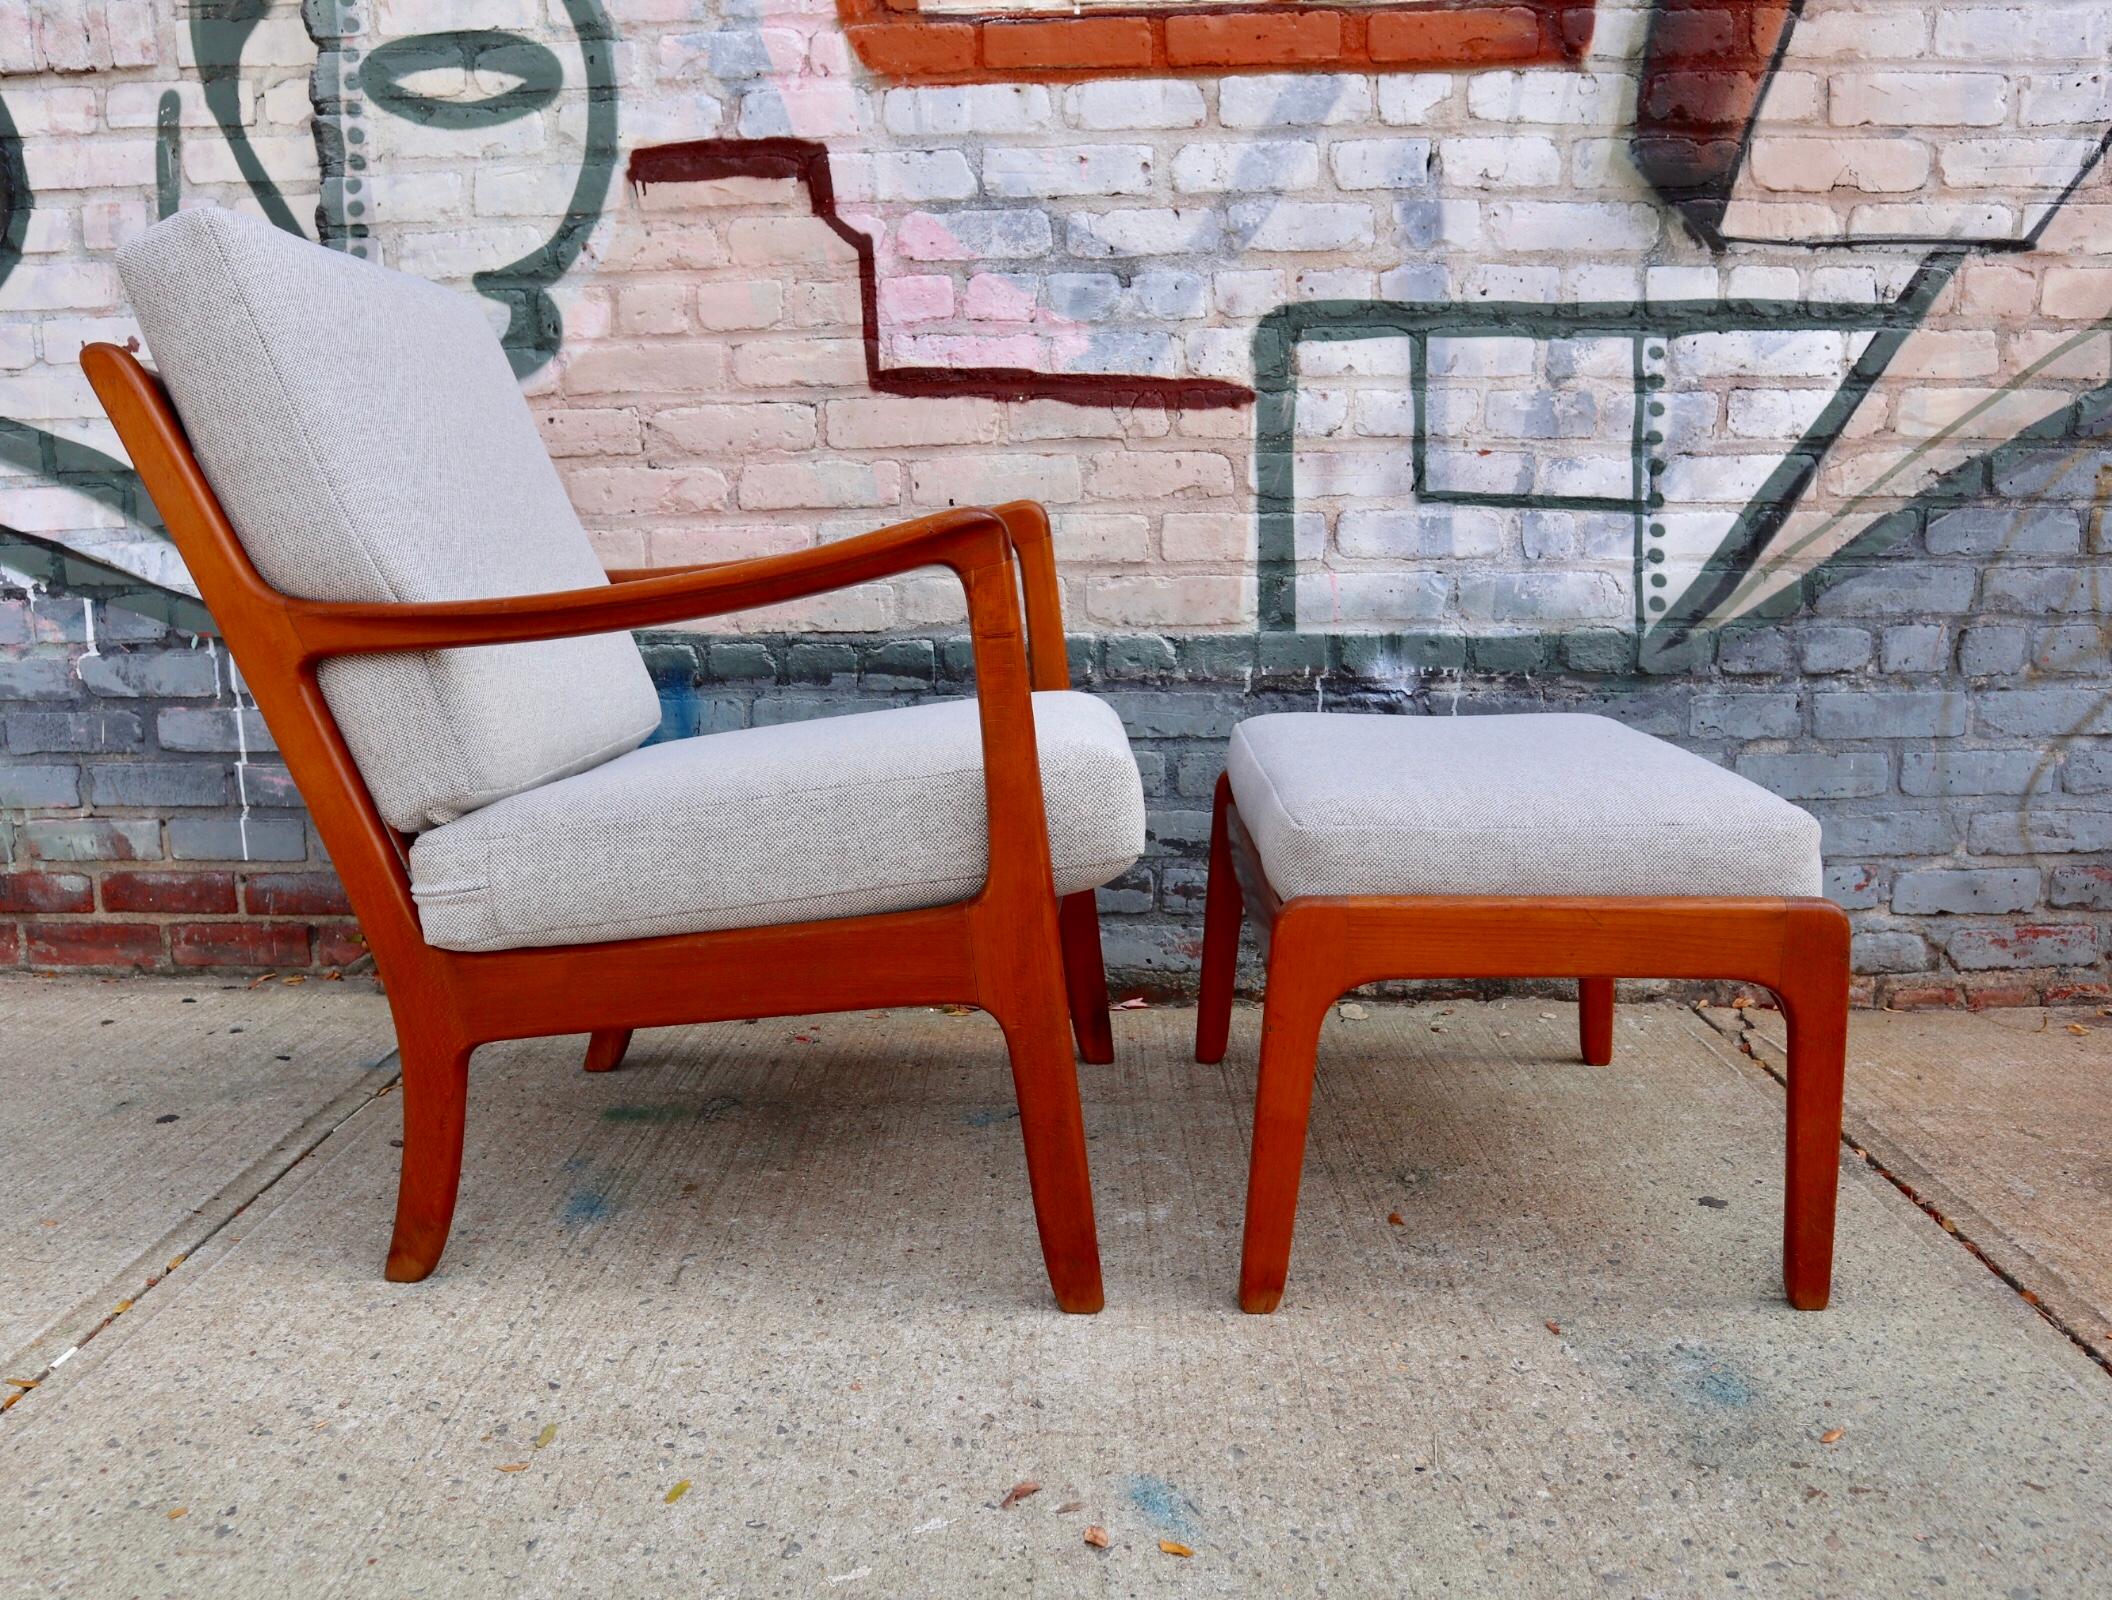 Beautiful lounge chair and ottoman designed by Ole Wanscher for John Stuart. Chair and ottoman both signed. Reupholstered in brand new Maharam textile that plays beautifully with the original bright and warm patine of the wood frame. The chair and